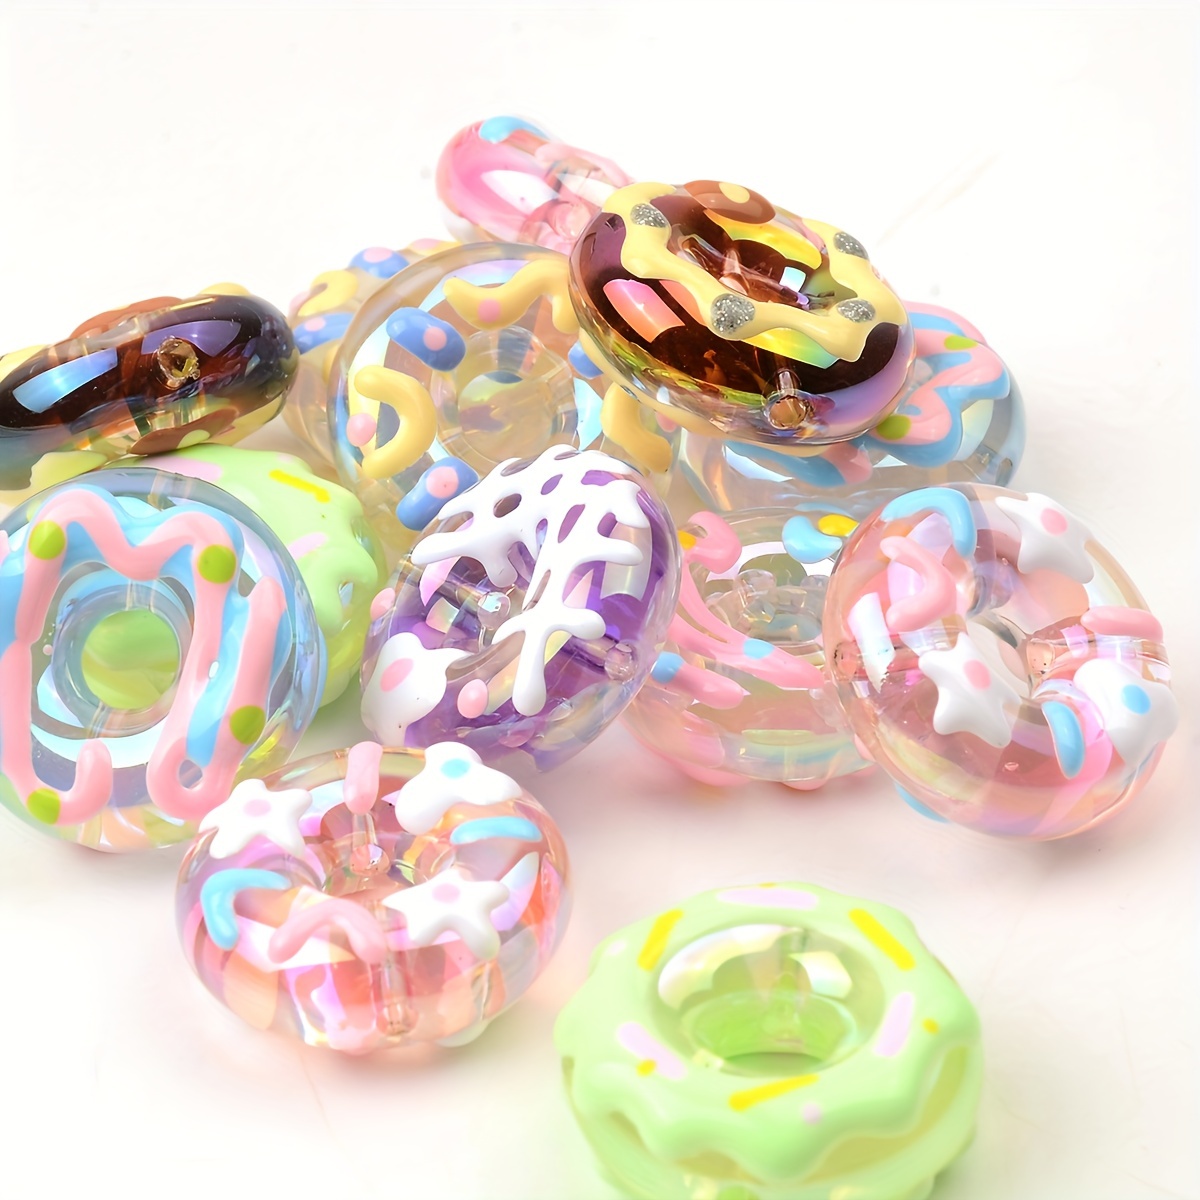 

5pcs Hand-painted Mixed Donut Beads For Jewelry Making Diy Sweet Cute Creative Handmade Bracelets Necklaces Key Phone Chains Craft Supplies